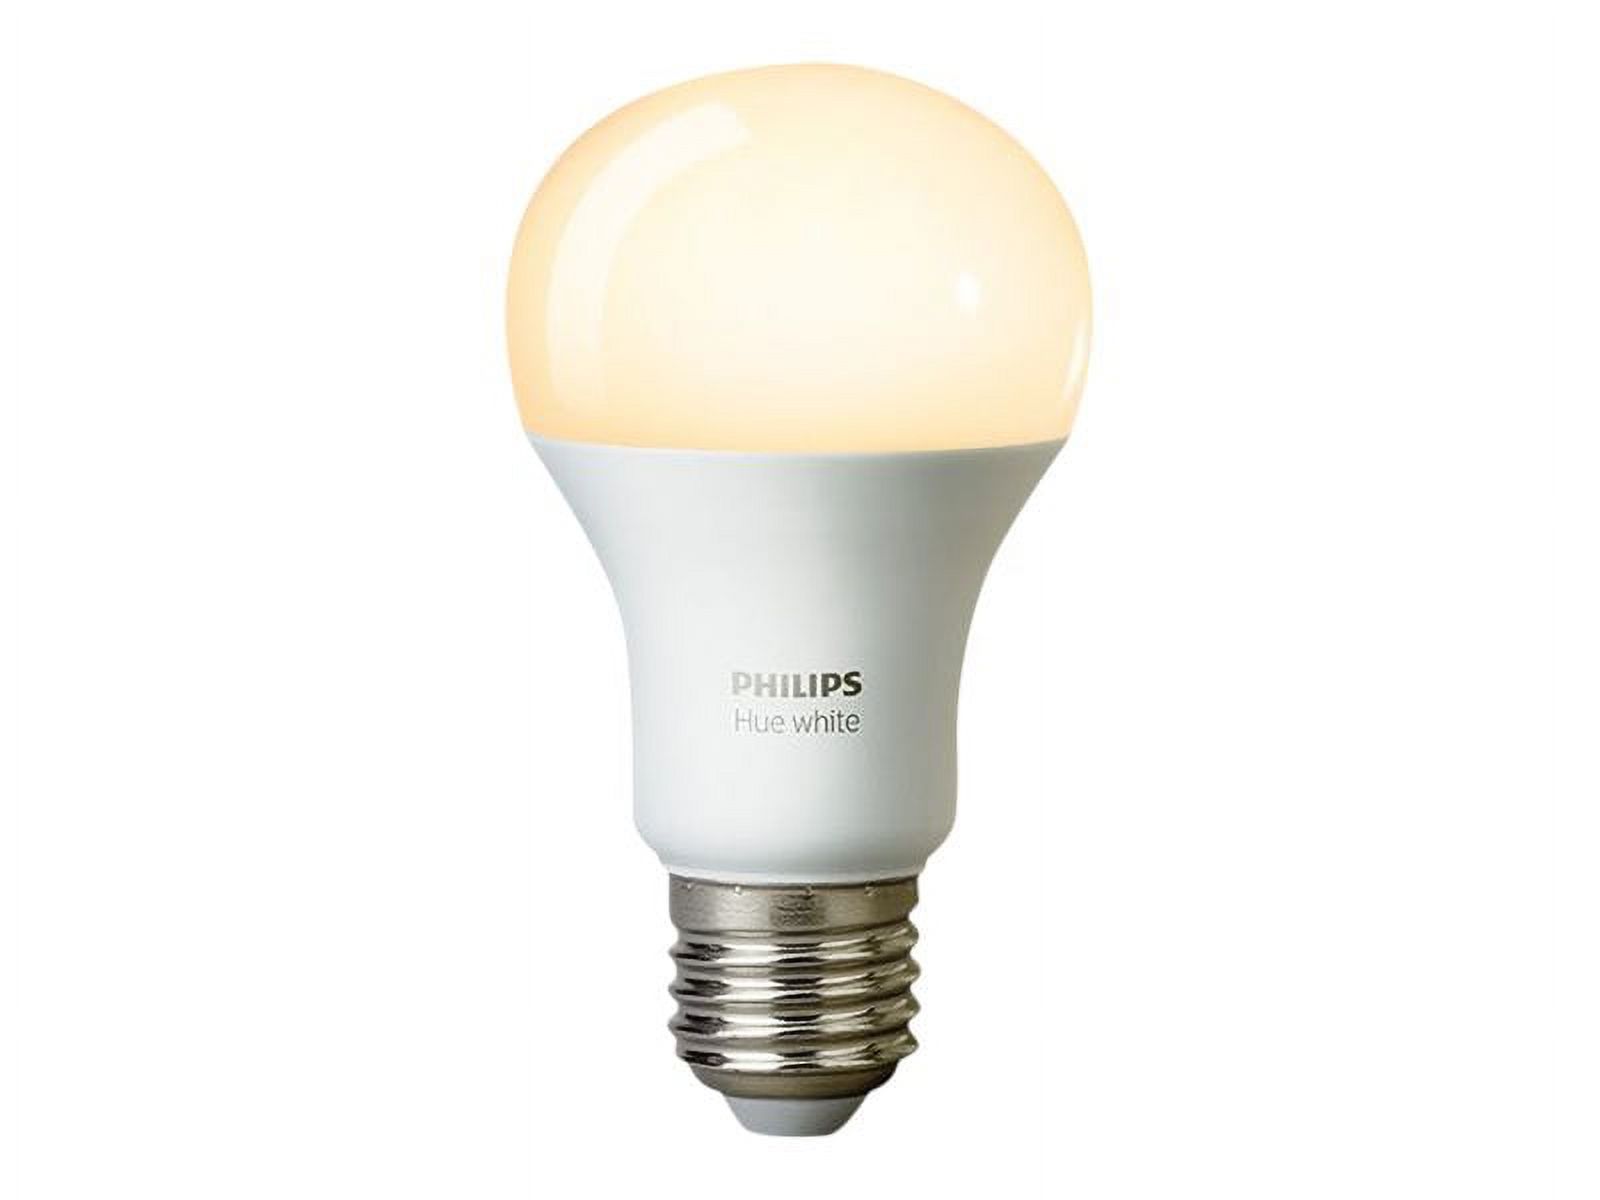 Philips Hue LED 60-Watt White Ambiance A19 Dimmable Wi-Fi Connected Smart Bulb 2 pack Starter Kit With Hub, E26 Medium Base - image 2 of 8